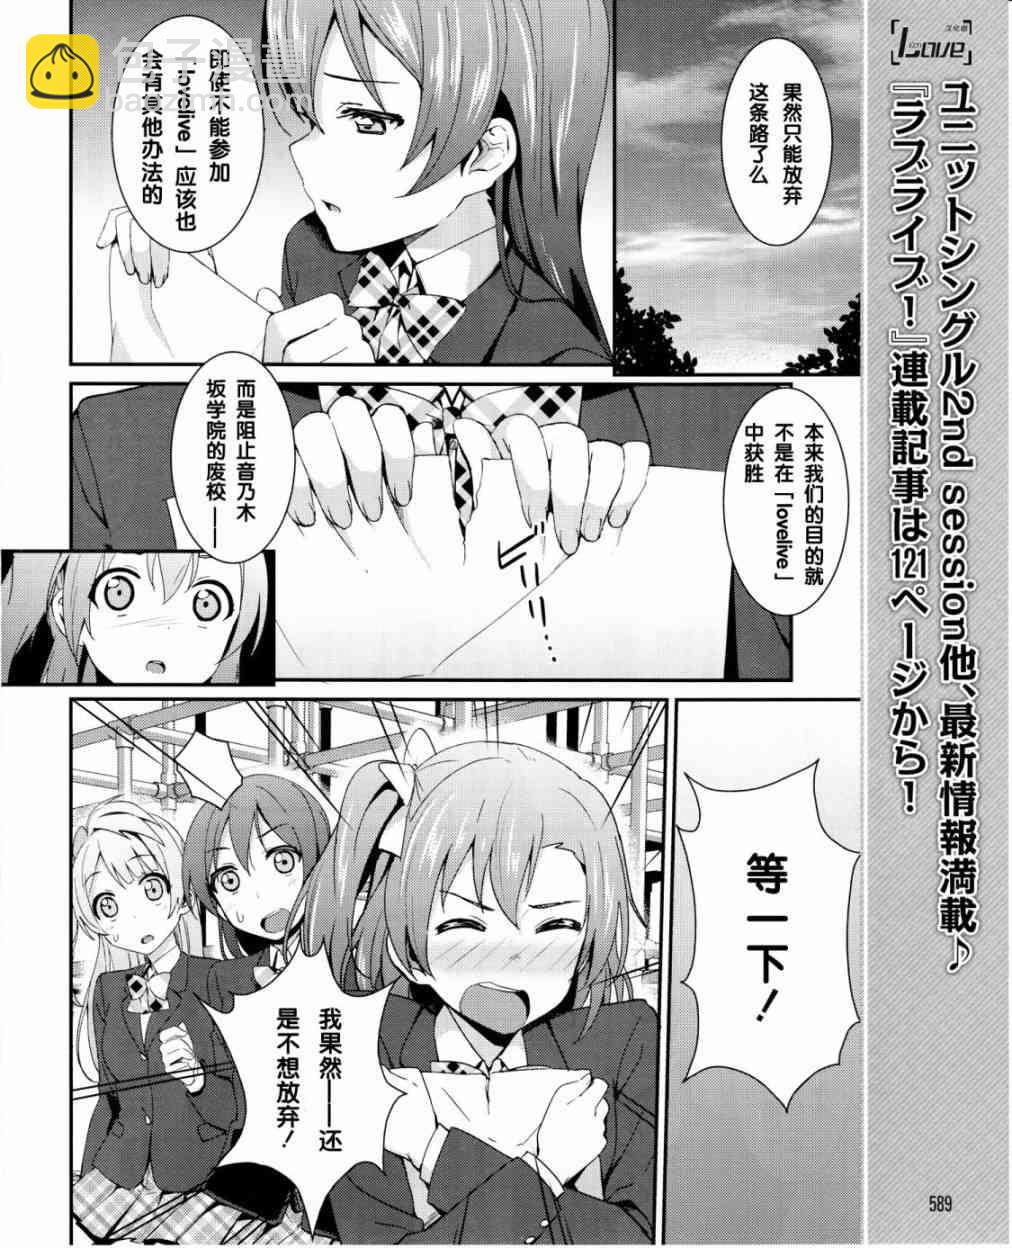 LoveLive - 16話 - 5